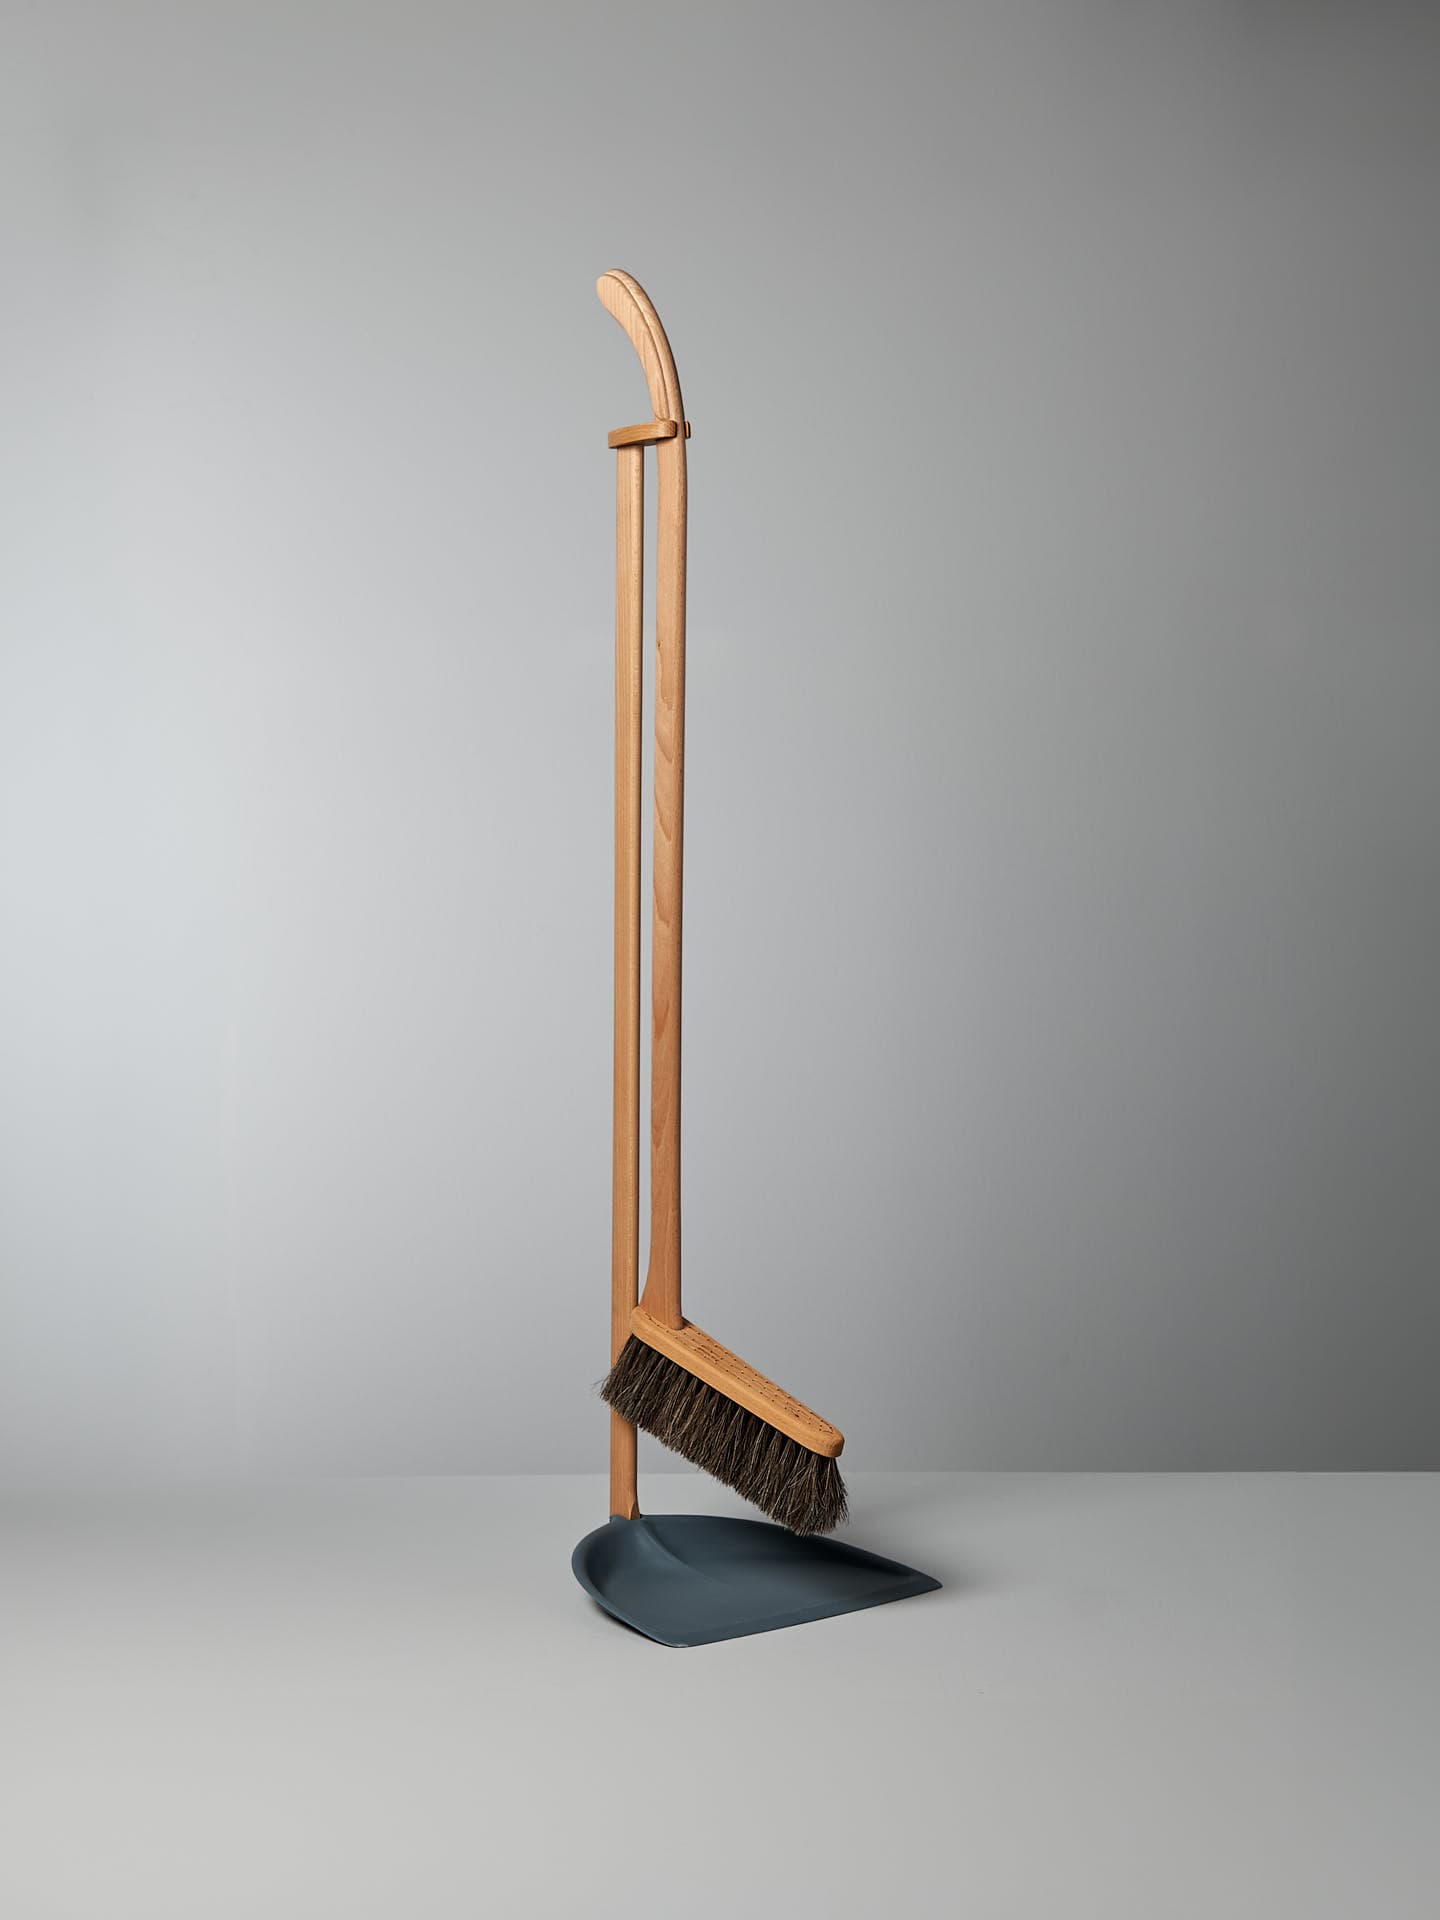 A Long Handled Dustpan & Brush Set – Petrol Blue by Iris Hantverk is standing upright against a plain gray background. Crafted by visually impaired artisans, this eco-friendly cleaning tool blends functionality and sustainability seamlessly.